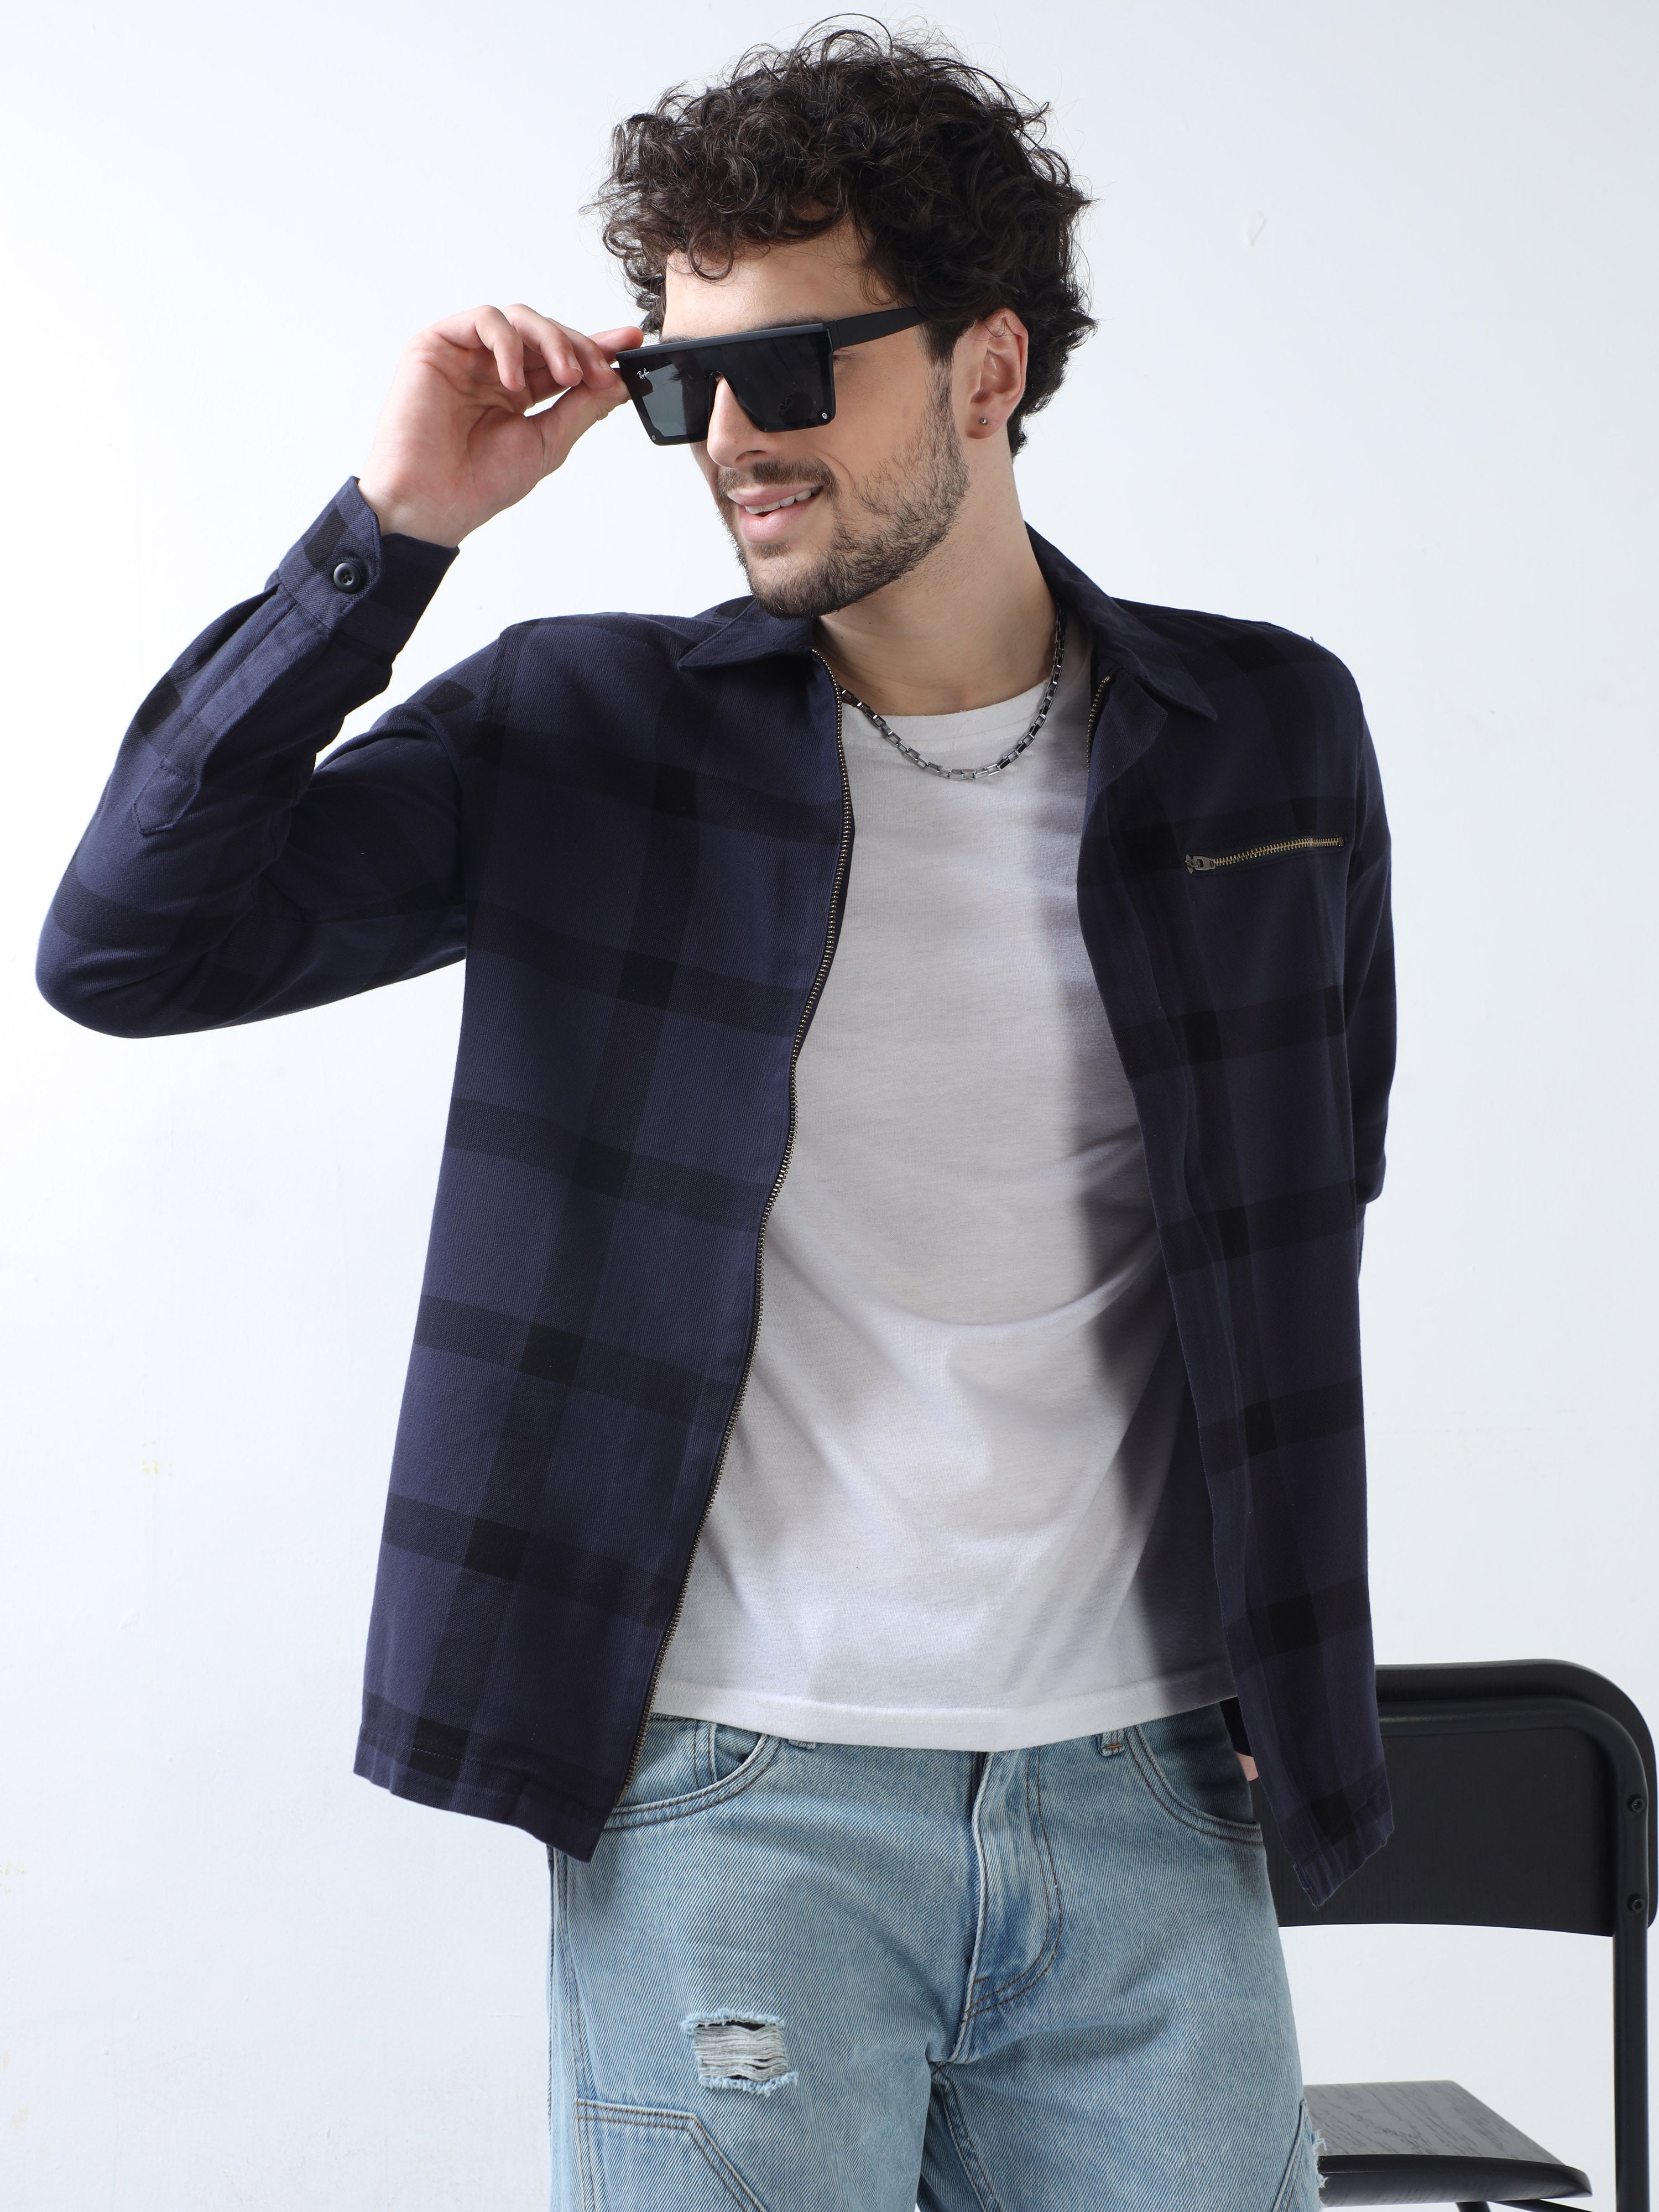 Shop Trendy Imperial Onyx Purple Check Shirt Online in IndiaRs. 1499.00